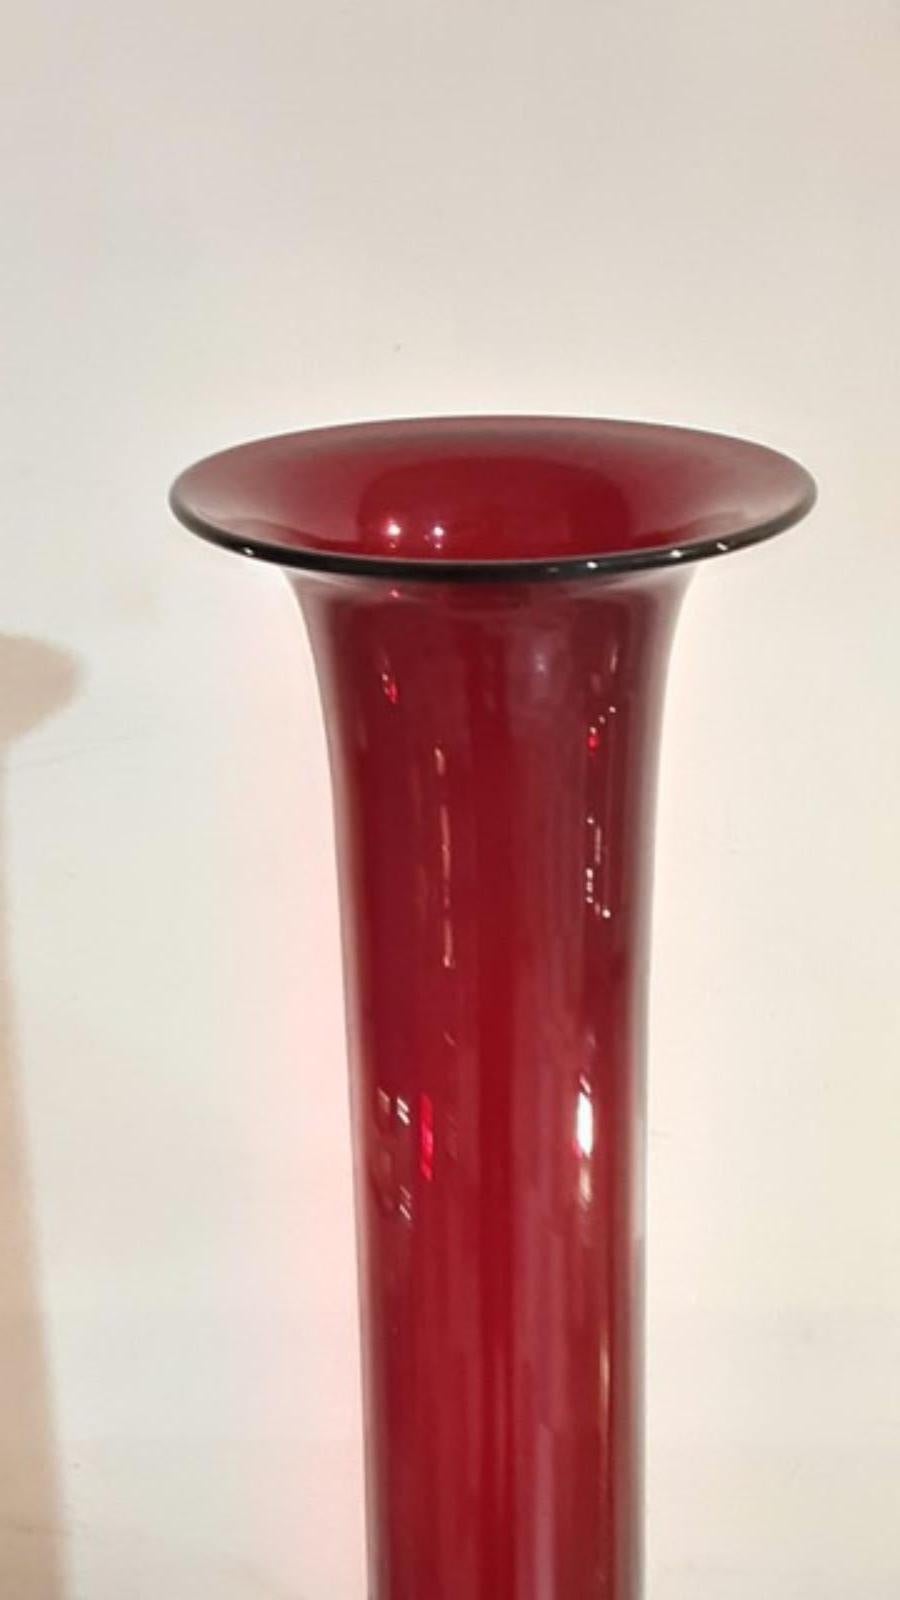 Red Venini vase is an original decorative vase was realized by Venini in the 1970s

Elegant red Murano glass vase. Marked under the base.

In excellent conditions.

Produced by Venini

Paolo Venini (1895 – 1959) emerged as one of the leading